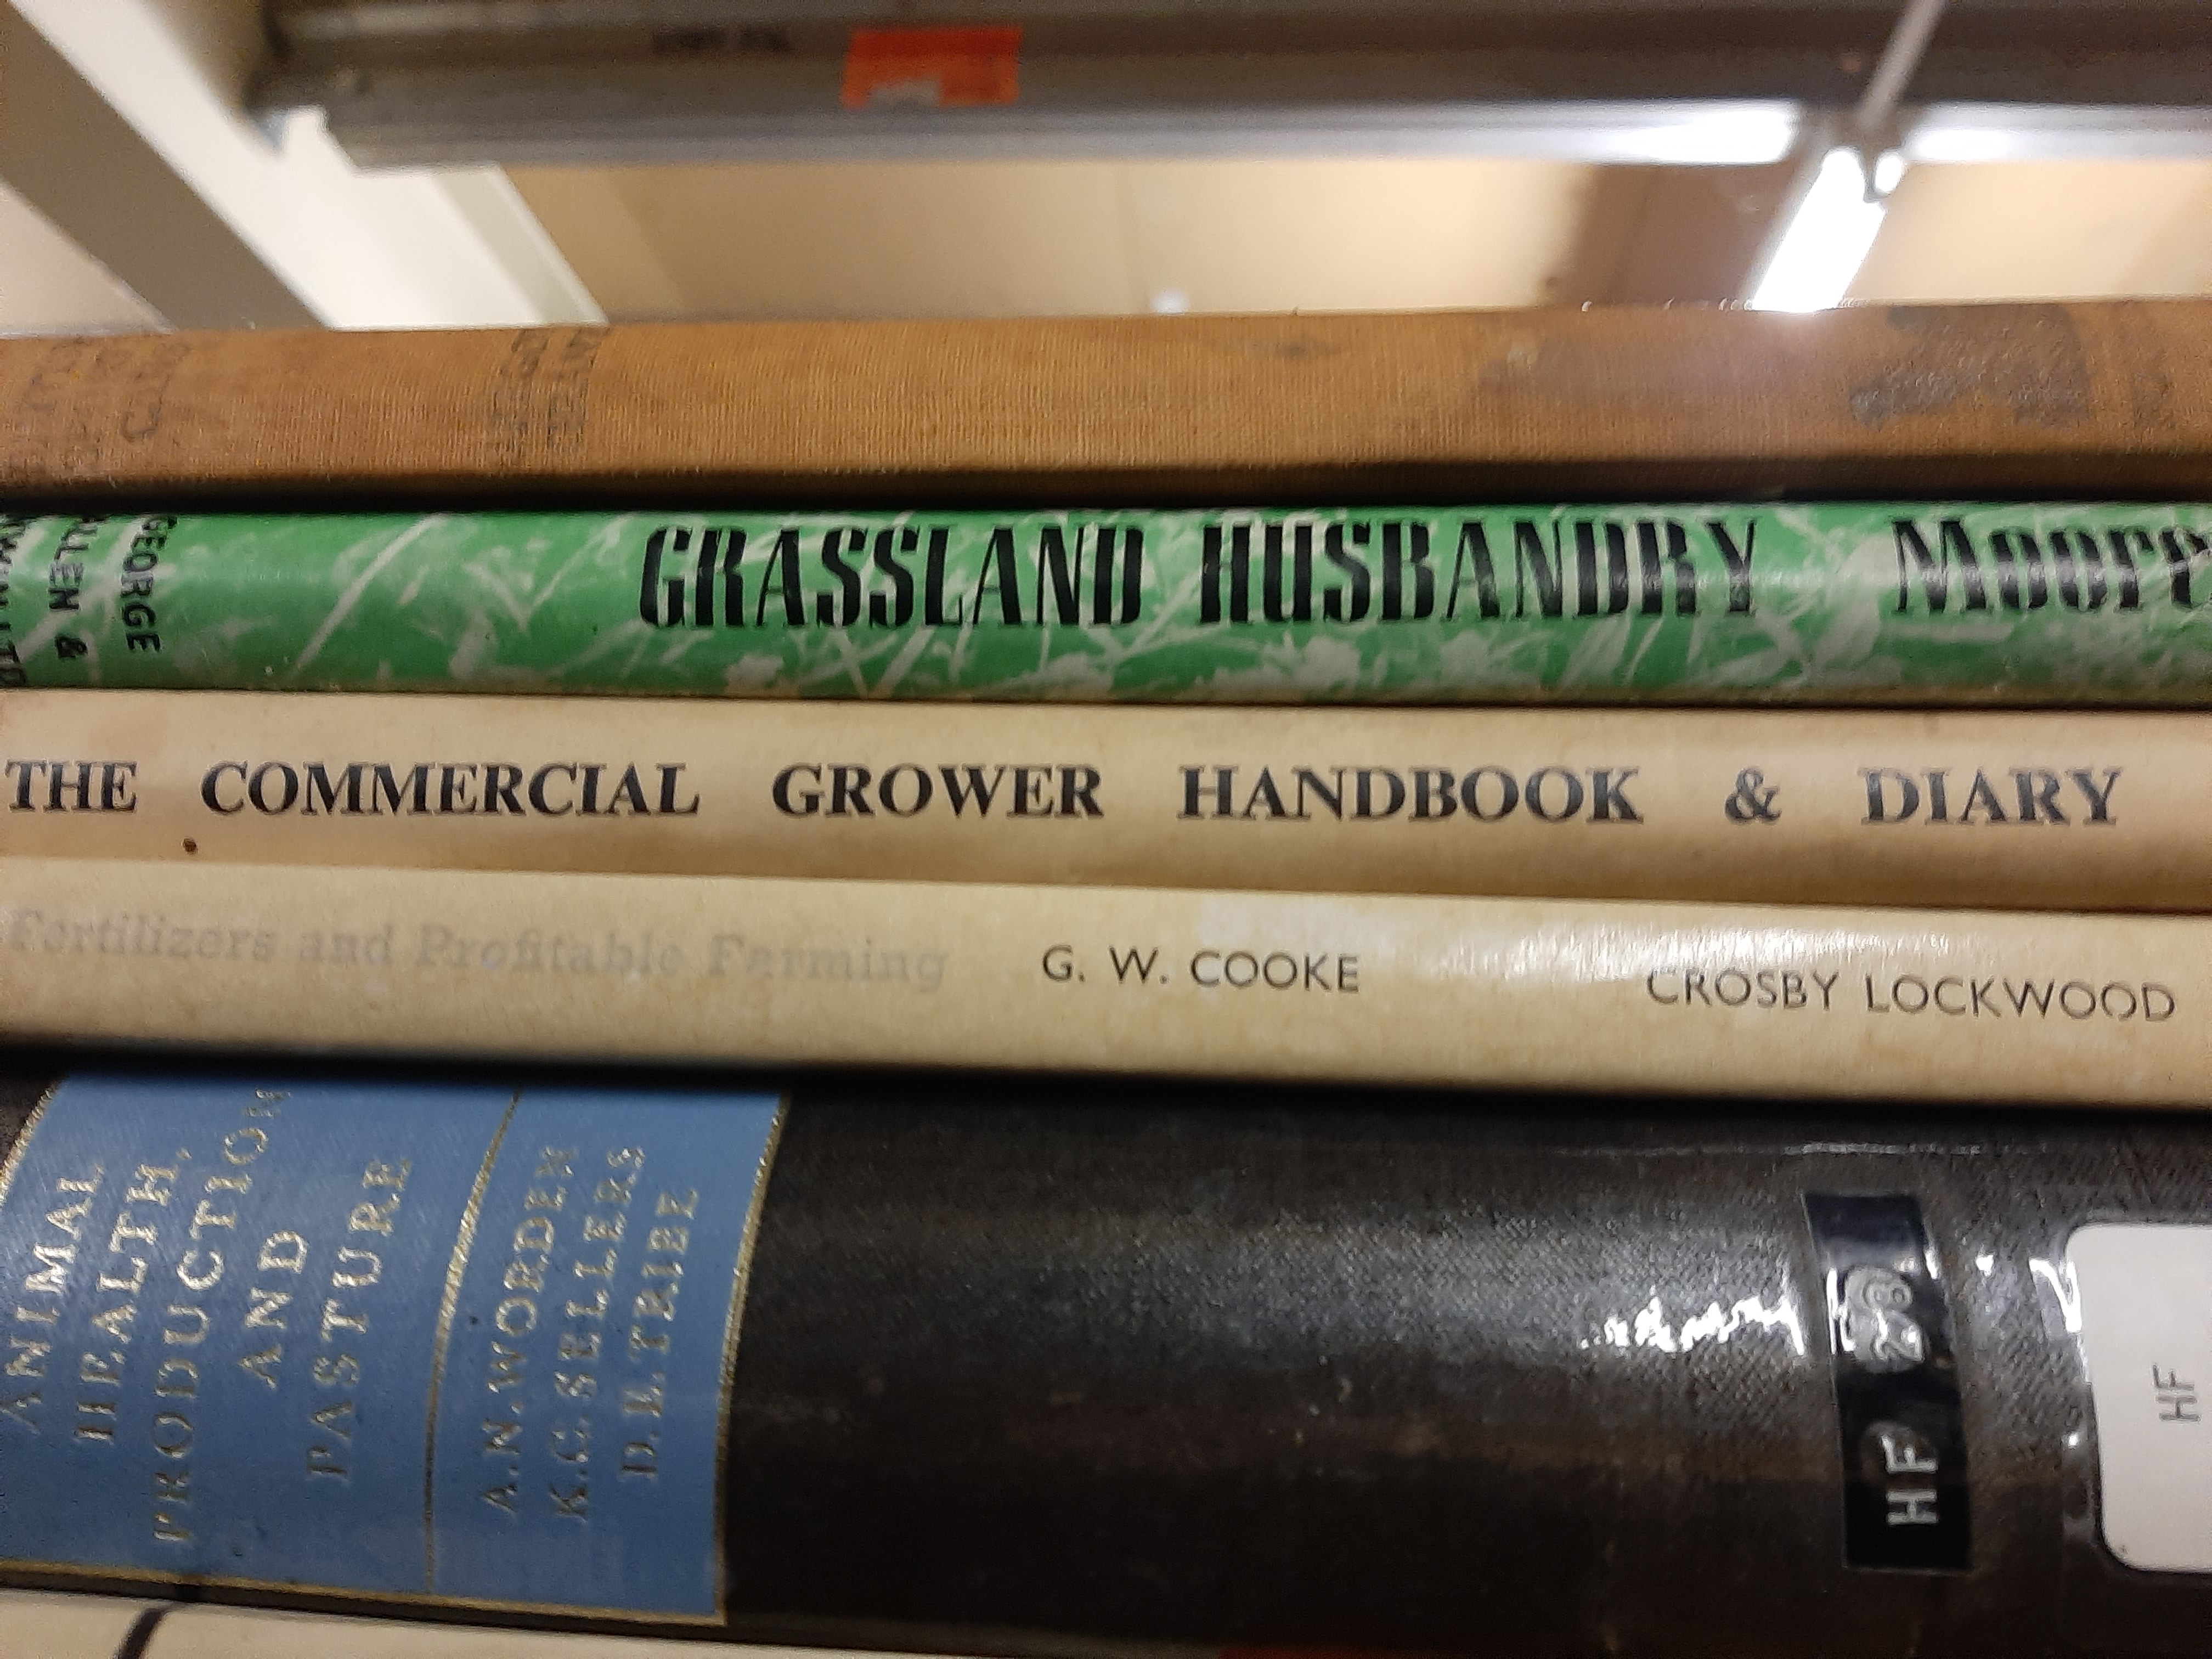 Collection of various Agriculture Books, rare as removed from library of Plant Breeding Institue - Image 2 of 2